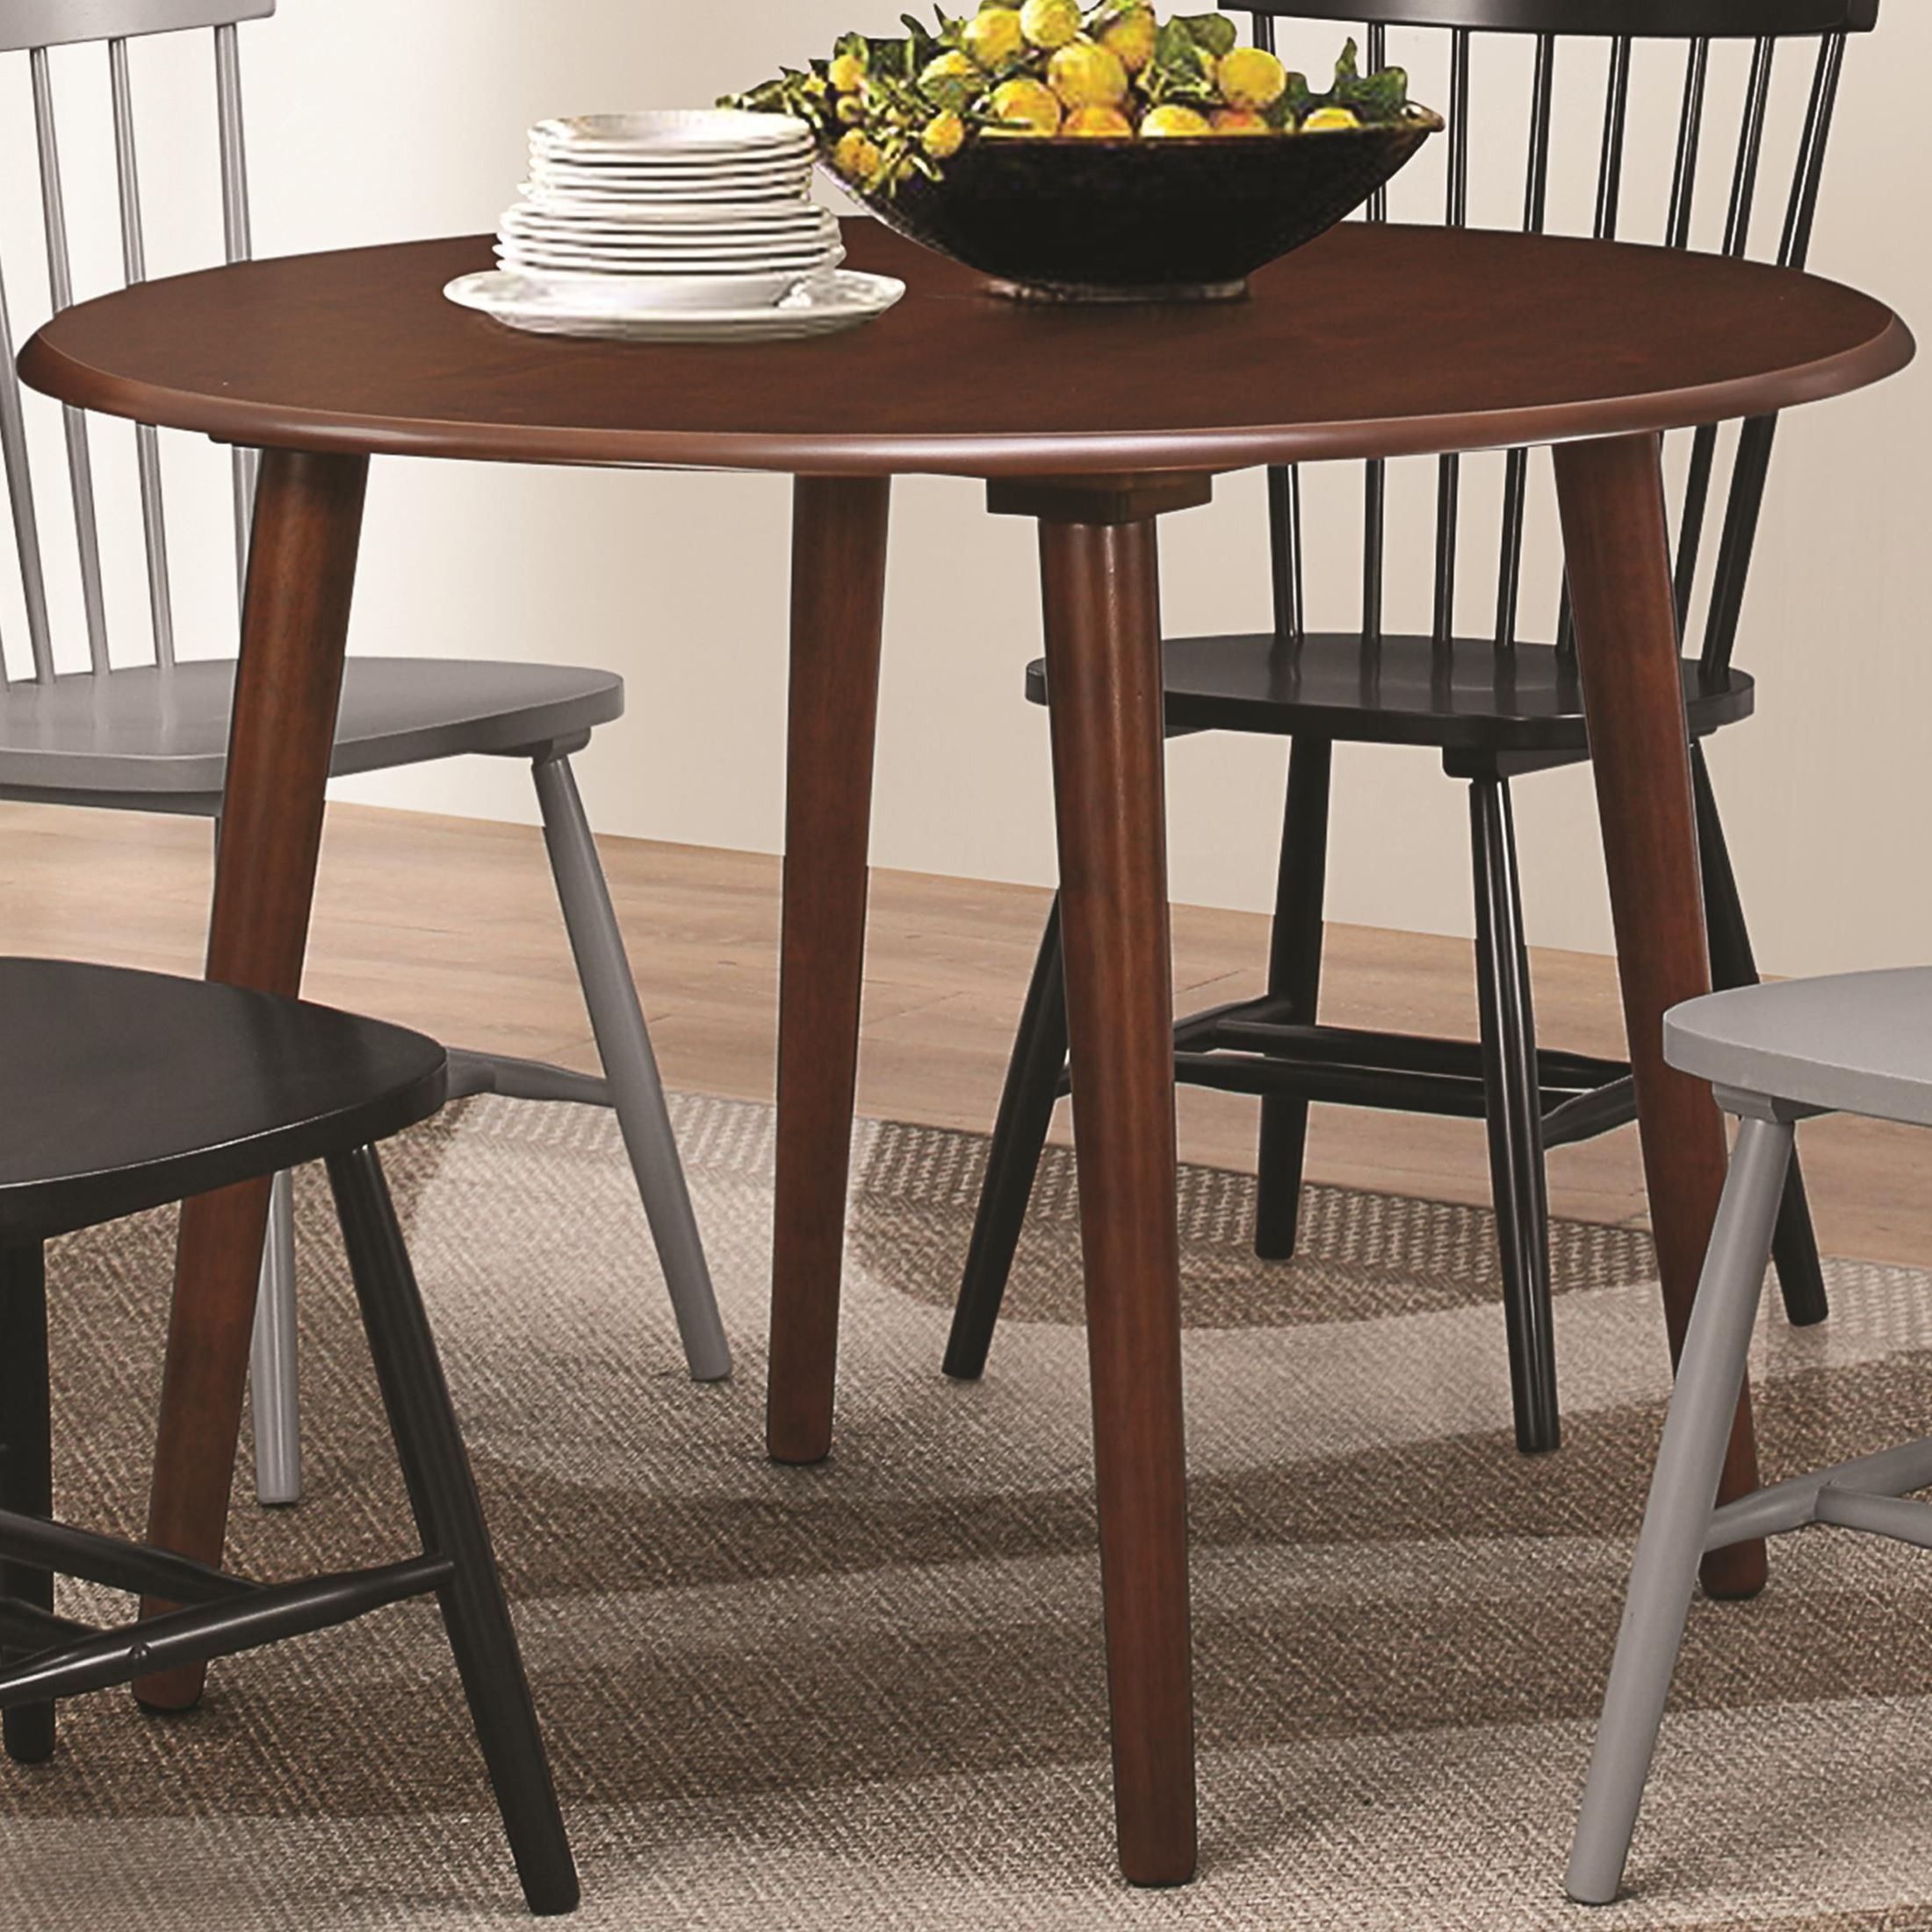 Emmett Walnut Round Dining Table From Coaster (104000 In Best And Newest Walnut Tove Dining Tables (View 5 of 15)